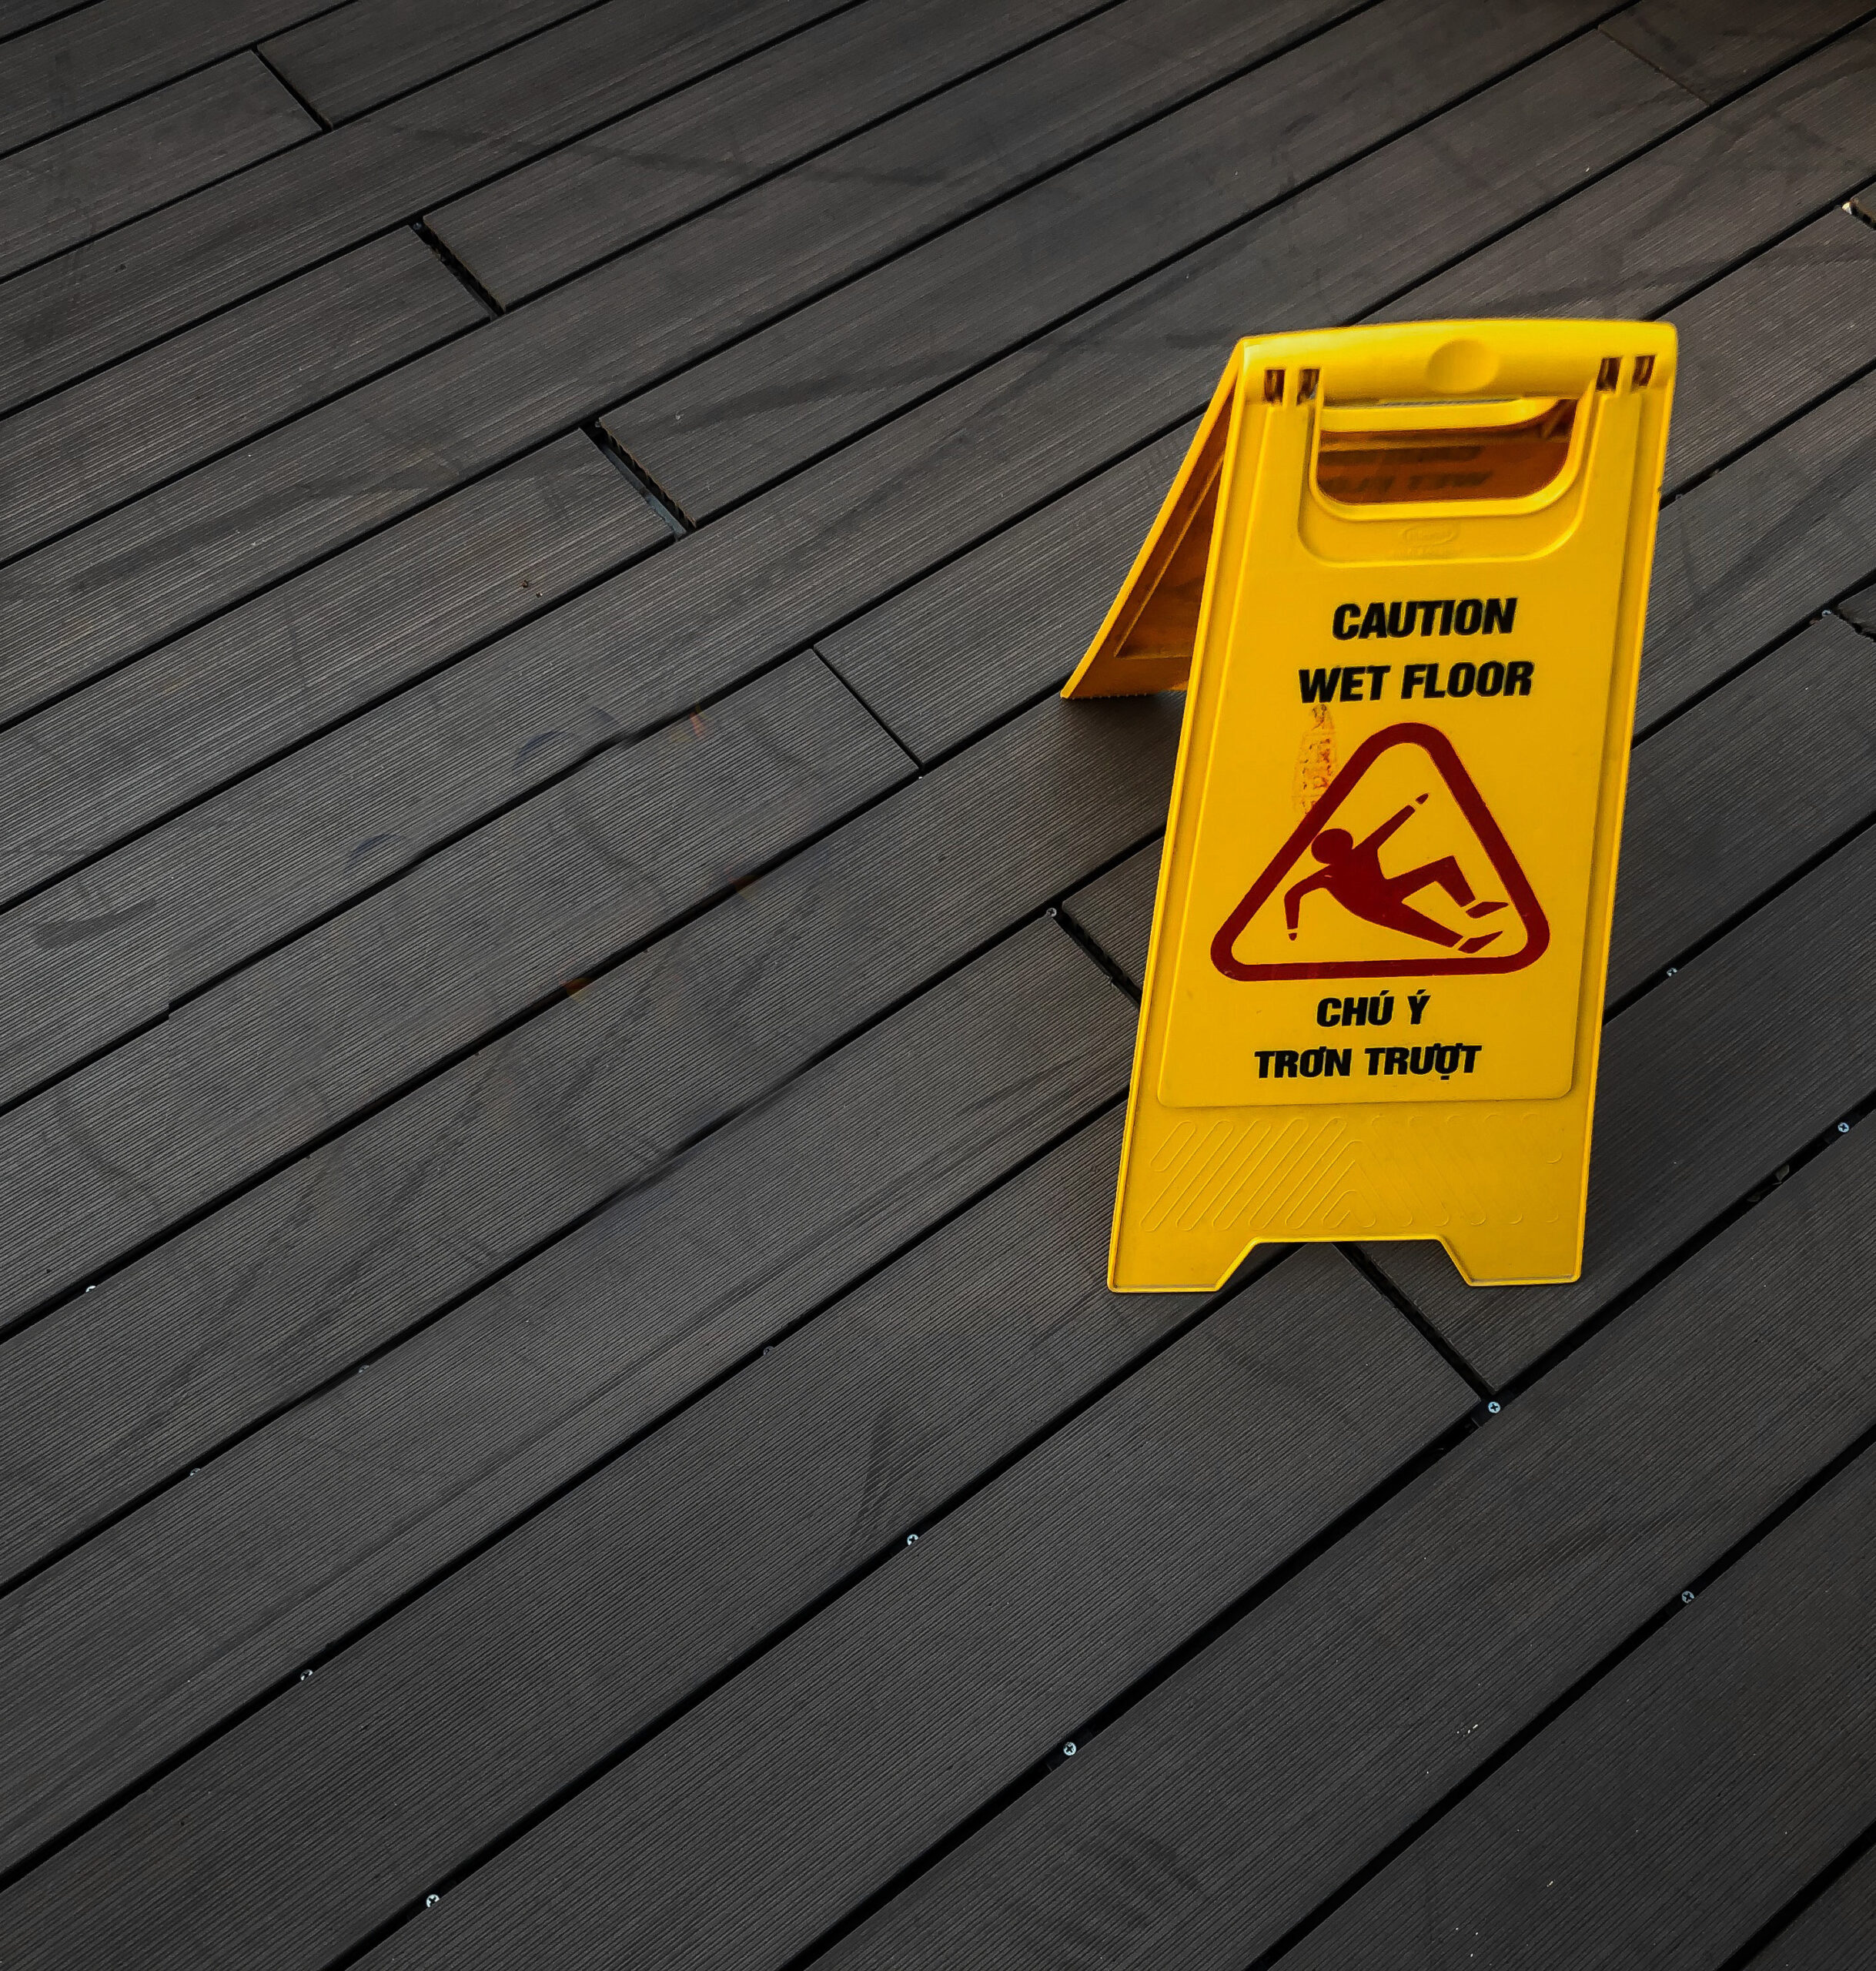 Slips, Trips and Fall Prevention – English